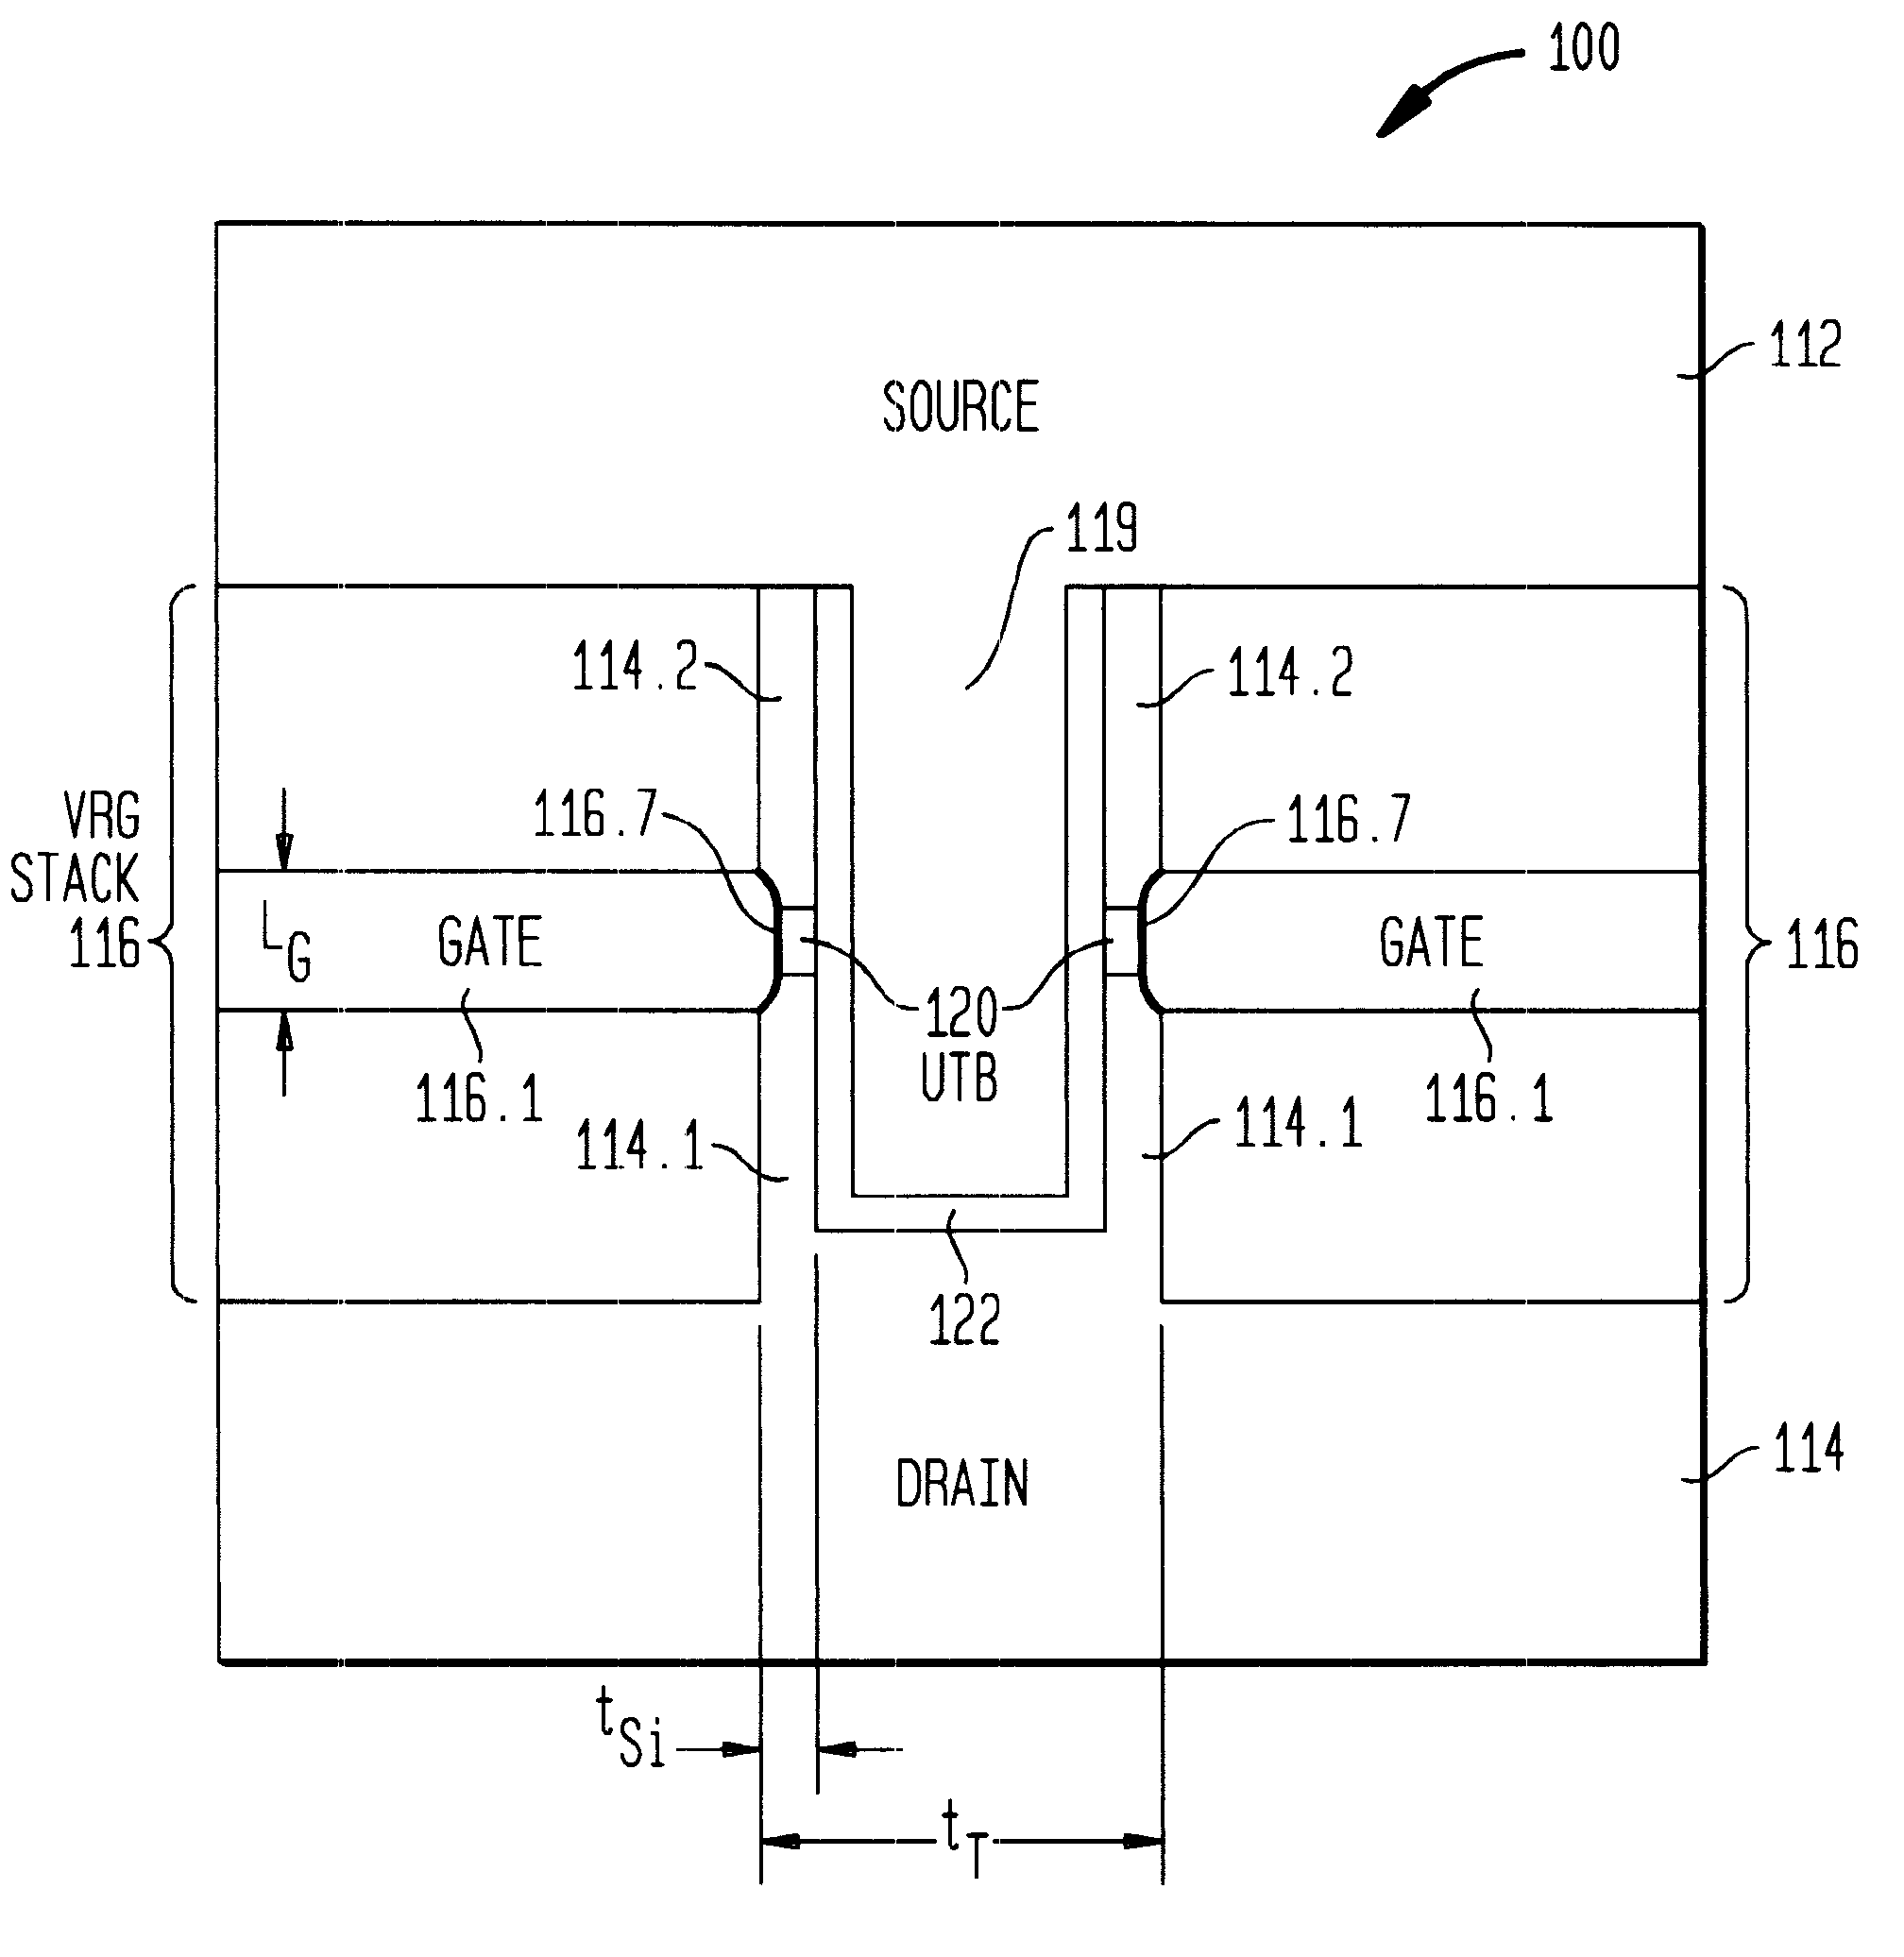 Ultra thin body vertical replacement gate MOSFET